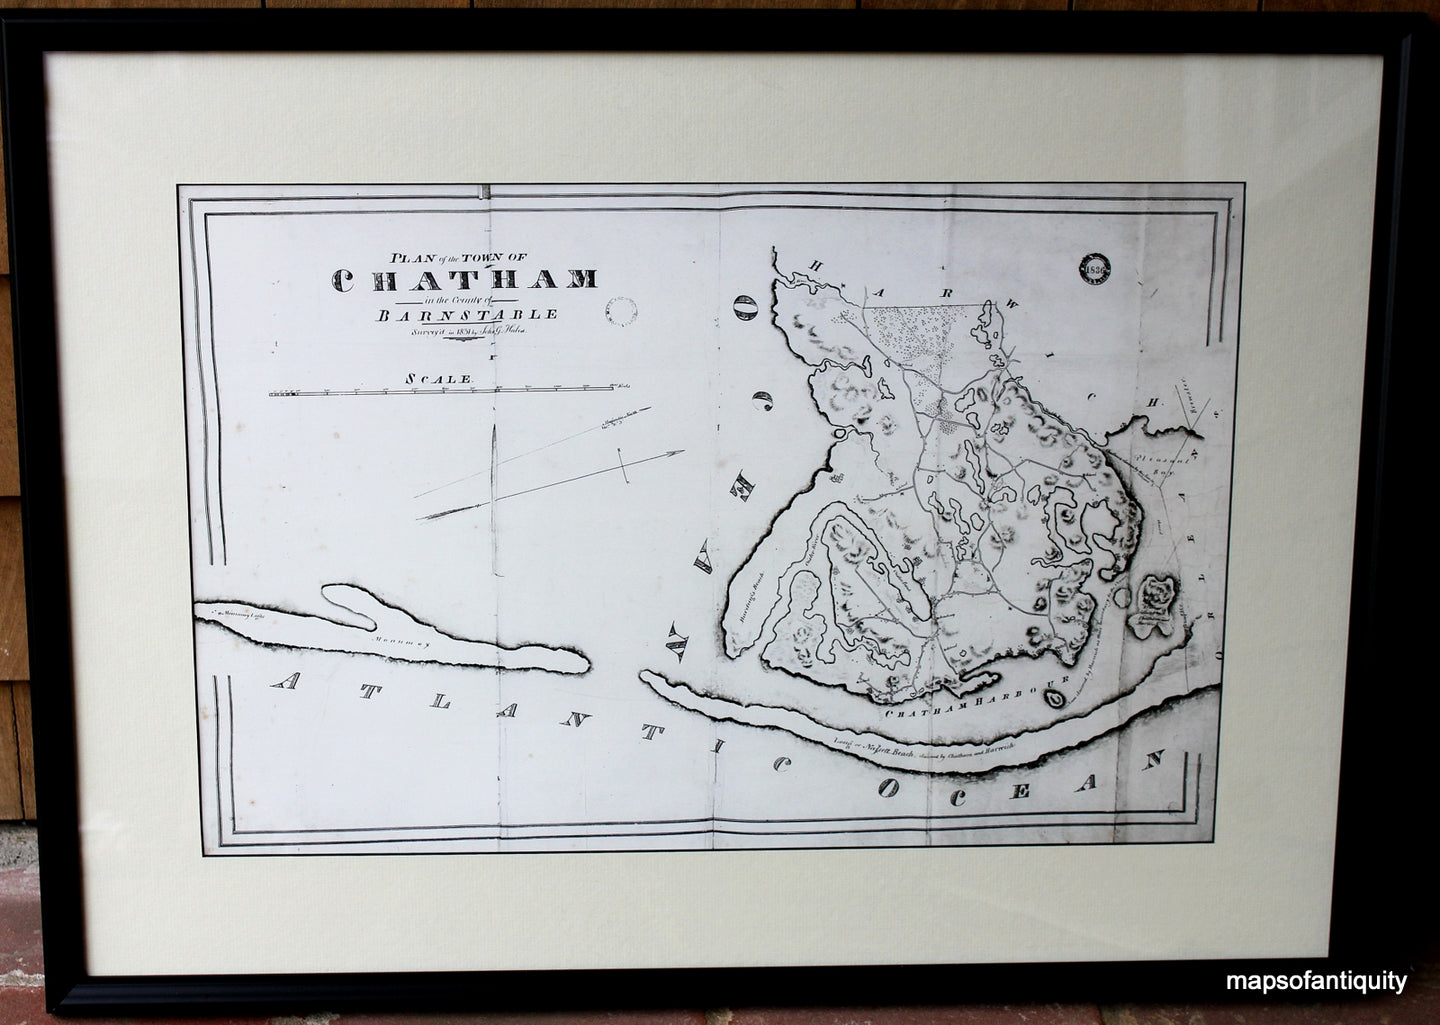 Reproduction-Plan-of-the-Town-of-Chatham-in-the-County-of-Barnstable-Surveyed-in-1831-by-John-Hales.-(Reproduction).-Reproductions-Cape-Cod-and-Islands-Chatham-Reproductions-Reproduction--Maps-Of-Antiquity